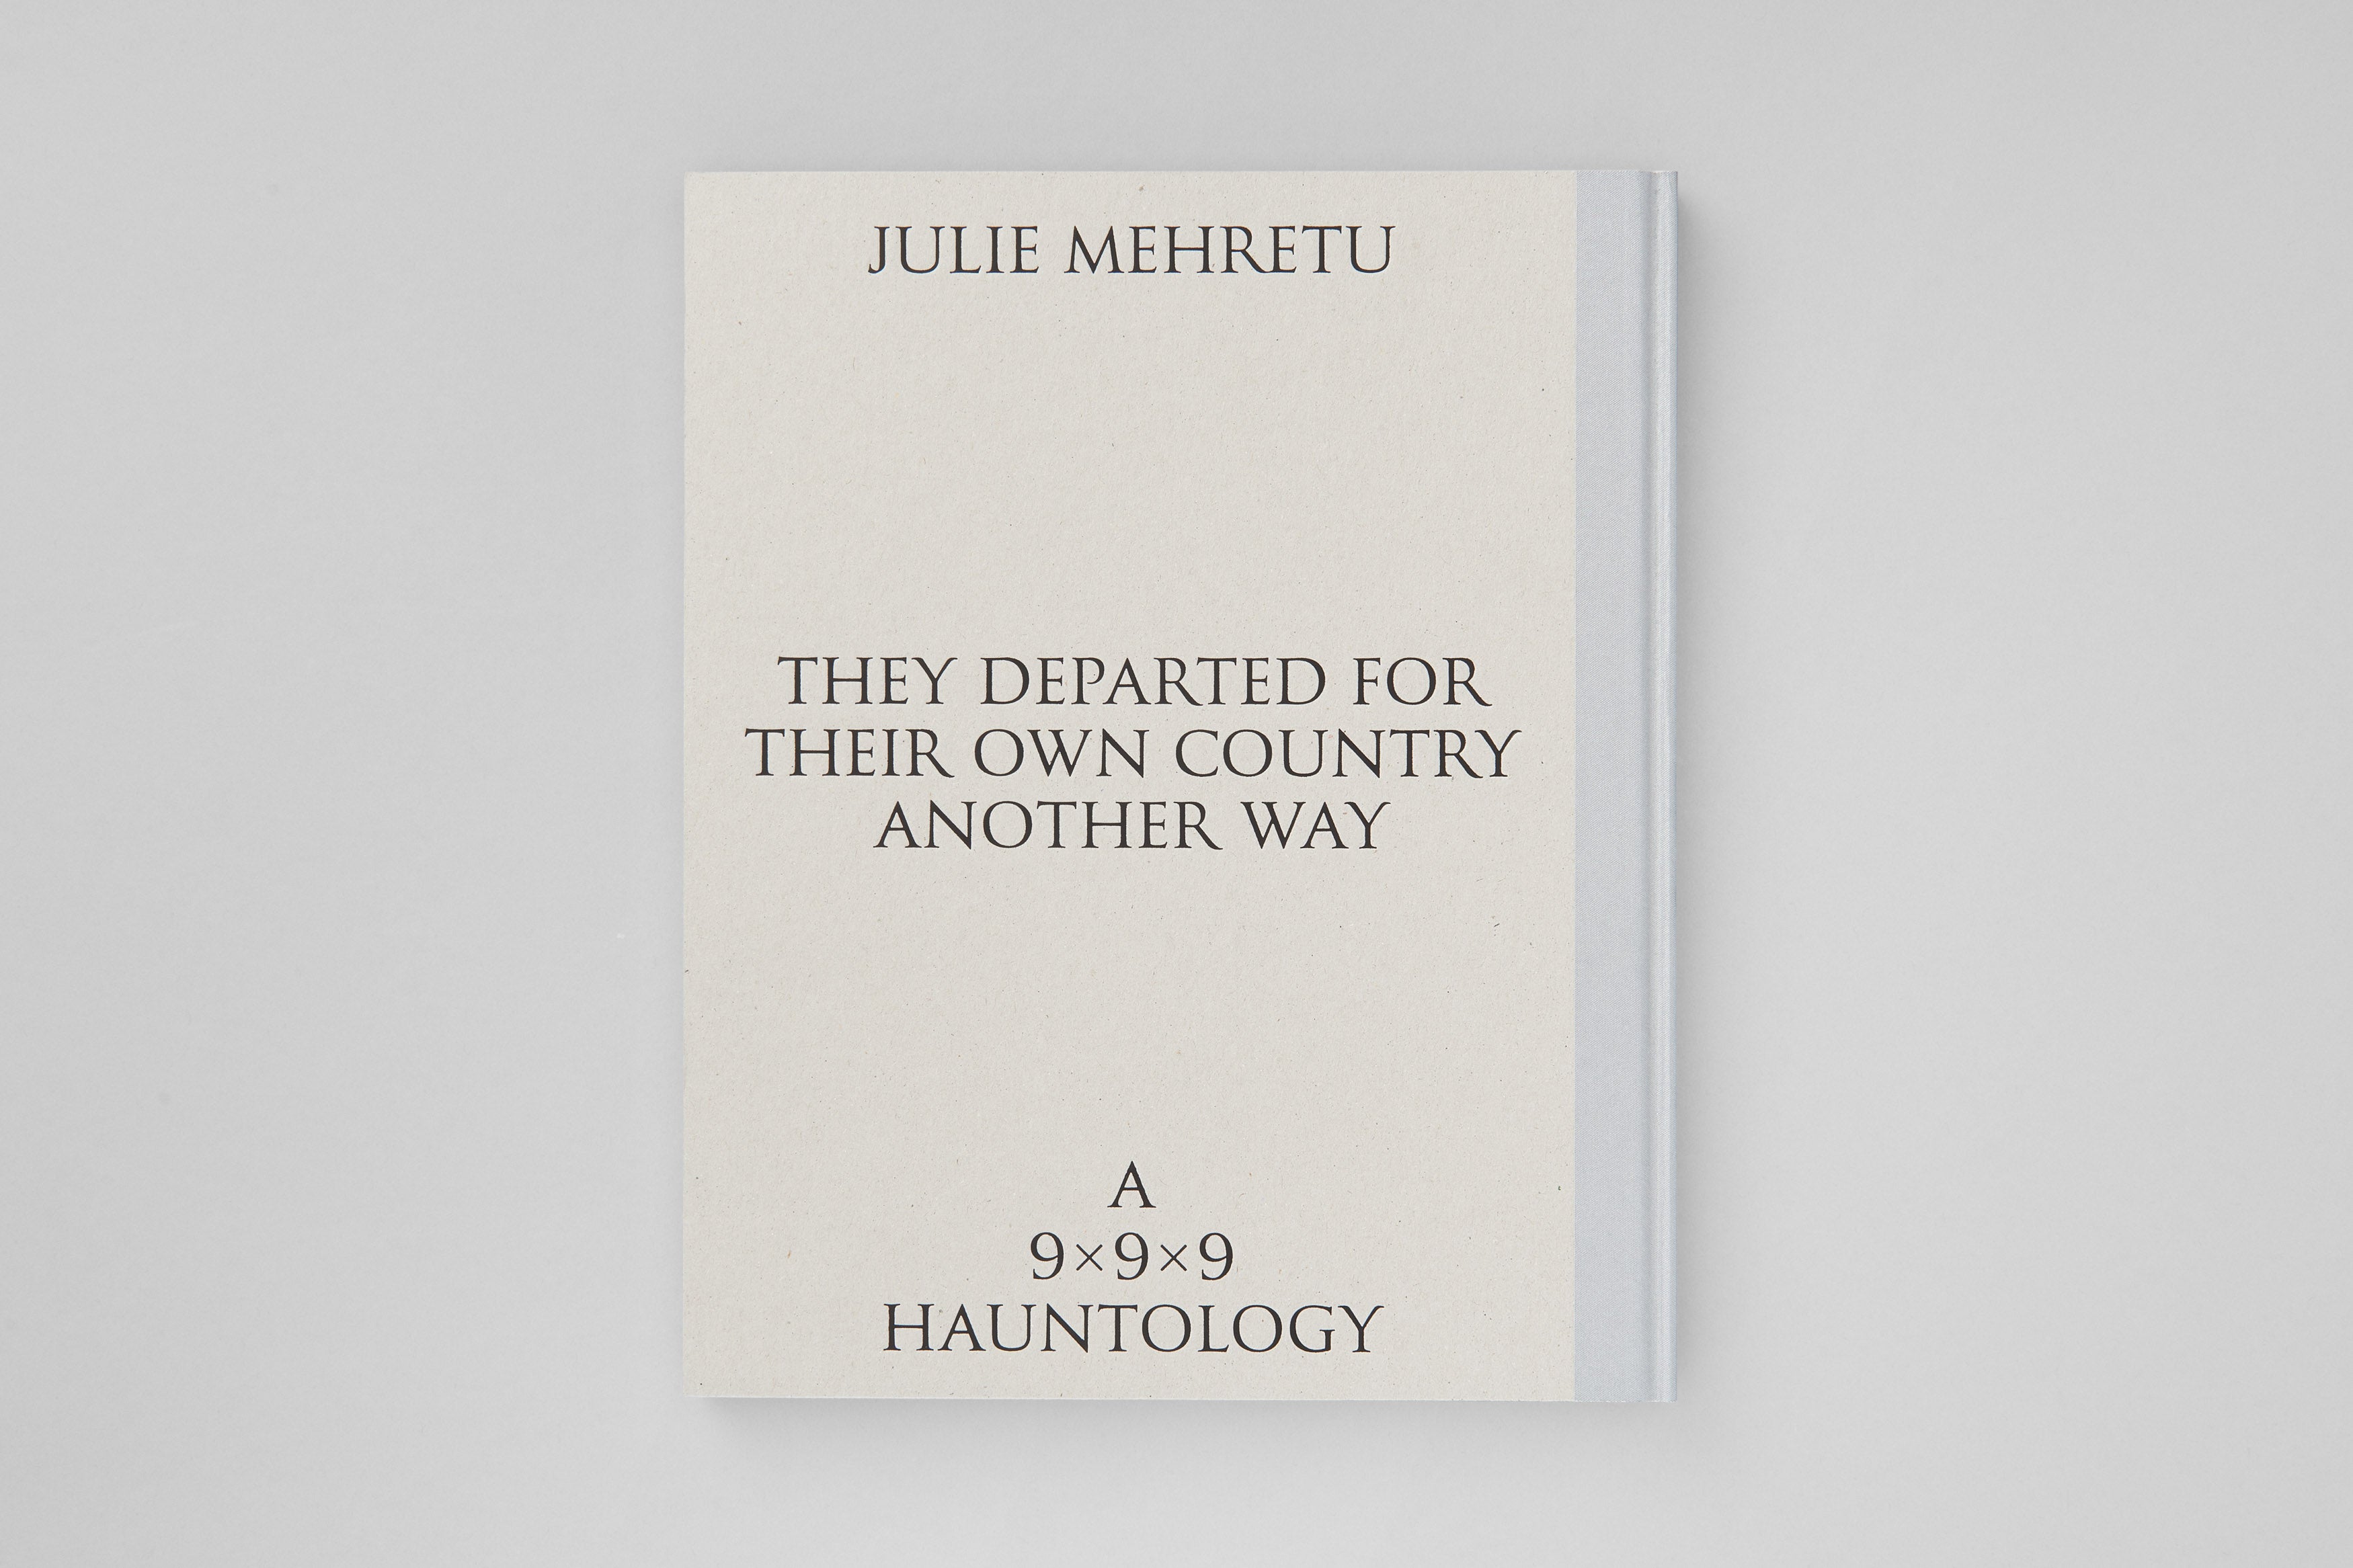 Julie Mehretu 'They departed for their own country another way (a 9x9x9 hauntology)' (2024)